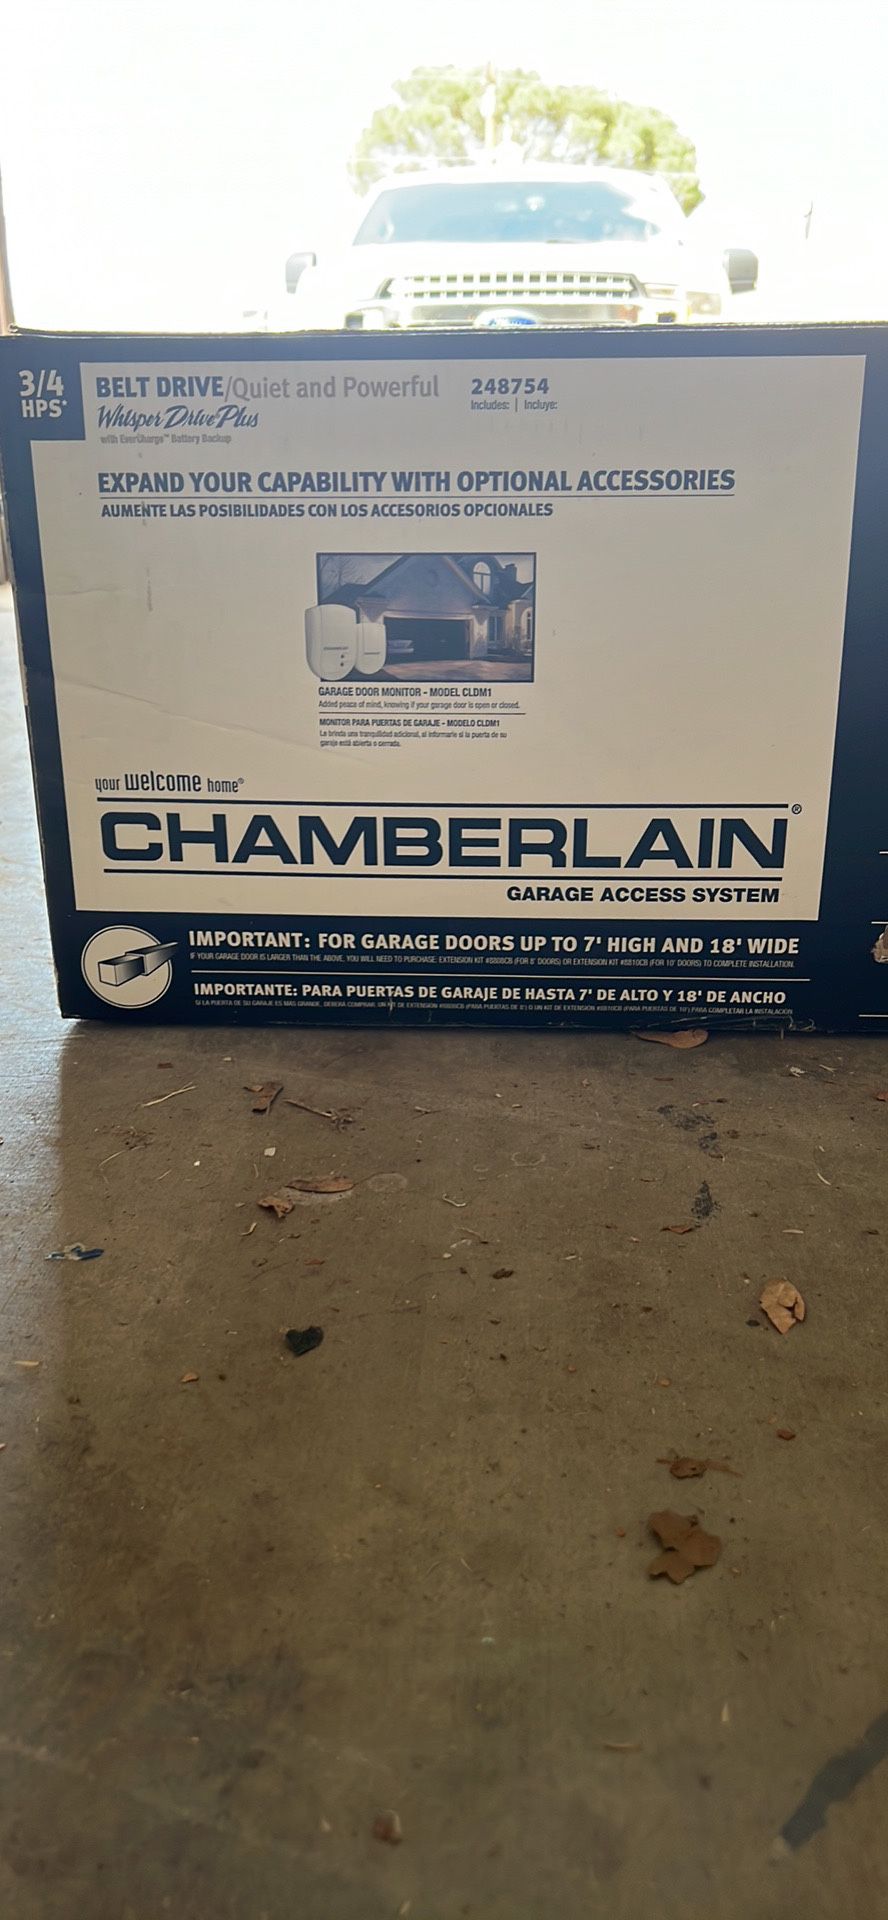 Chamberland garage Door Opener: Access System: Key Pad Access. Brand new Never Opened. Cost 290.00